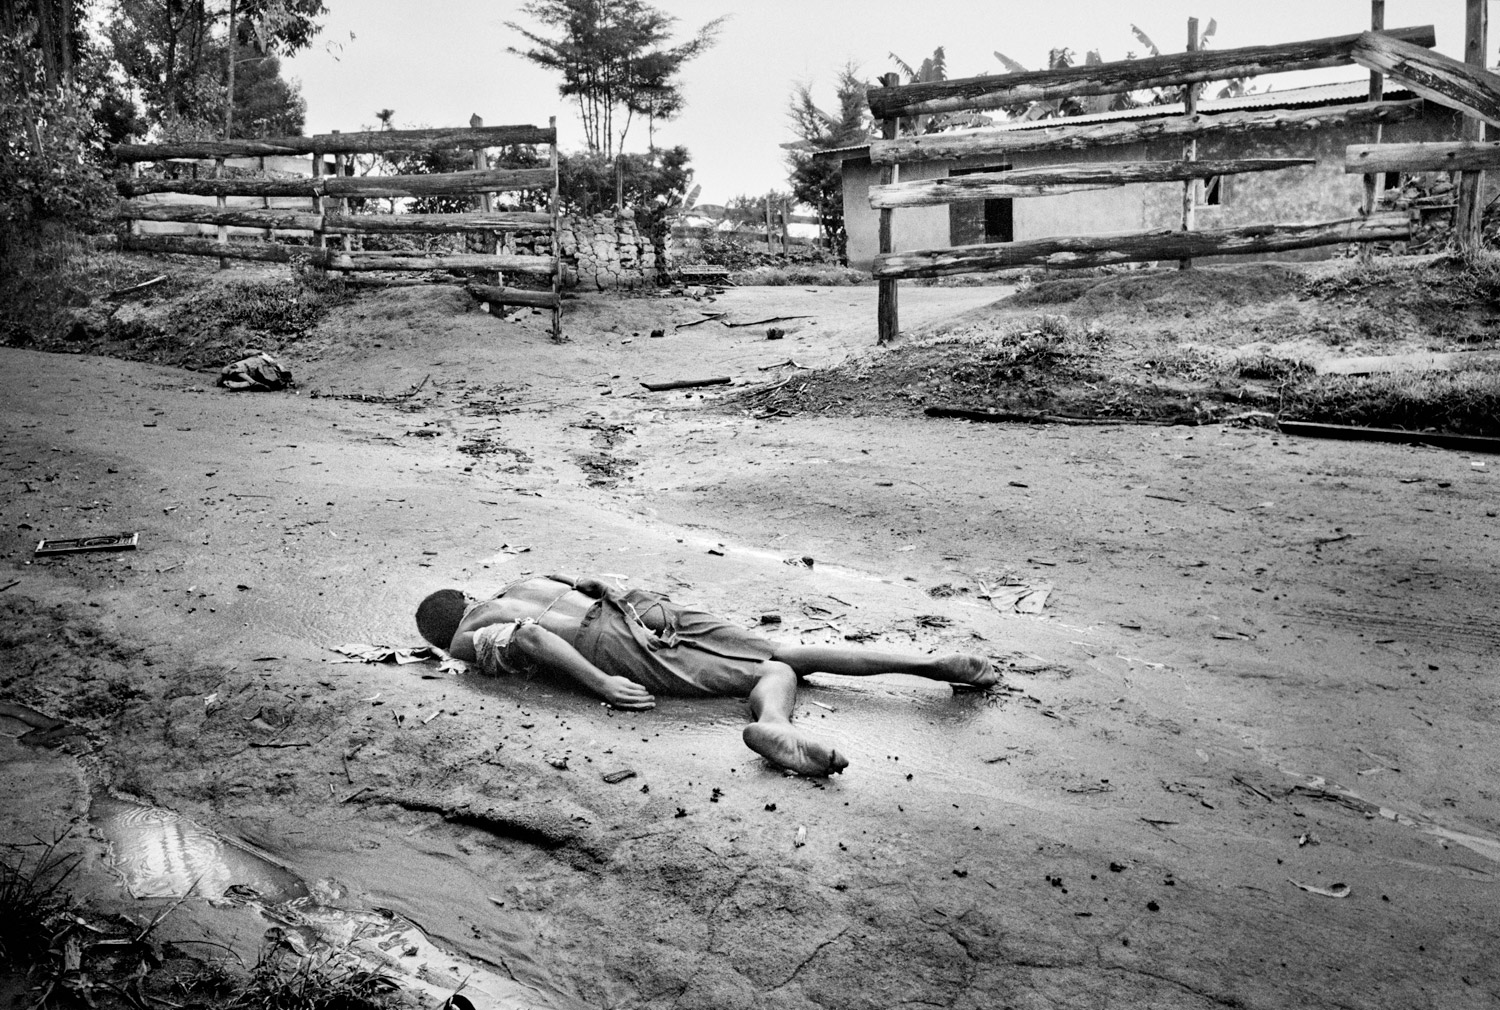 Two dead bodies of Hema men lie on a road after being executed by Lendu militias north of Fataki, Democratic Republic of Congo, in August 2003. They were both bound and impaled before being shot and their ears had been bitten off in the ritual killing.